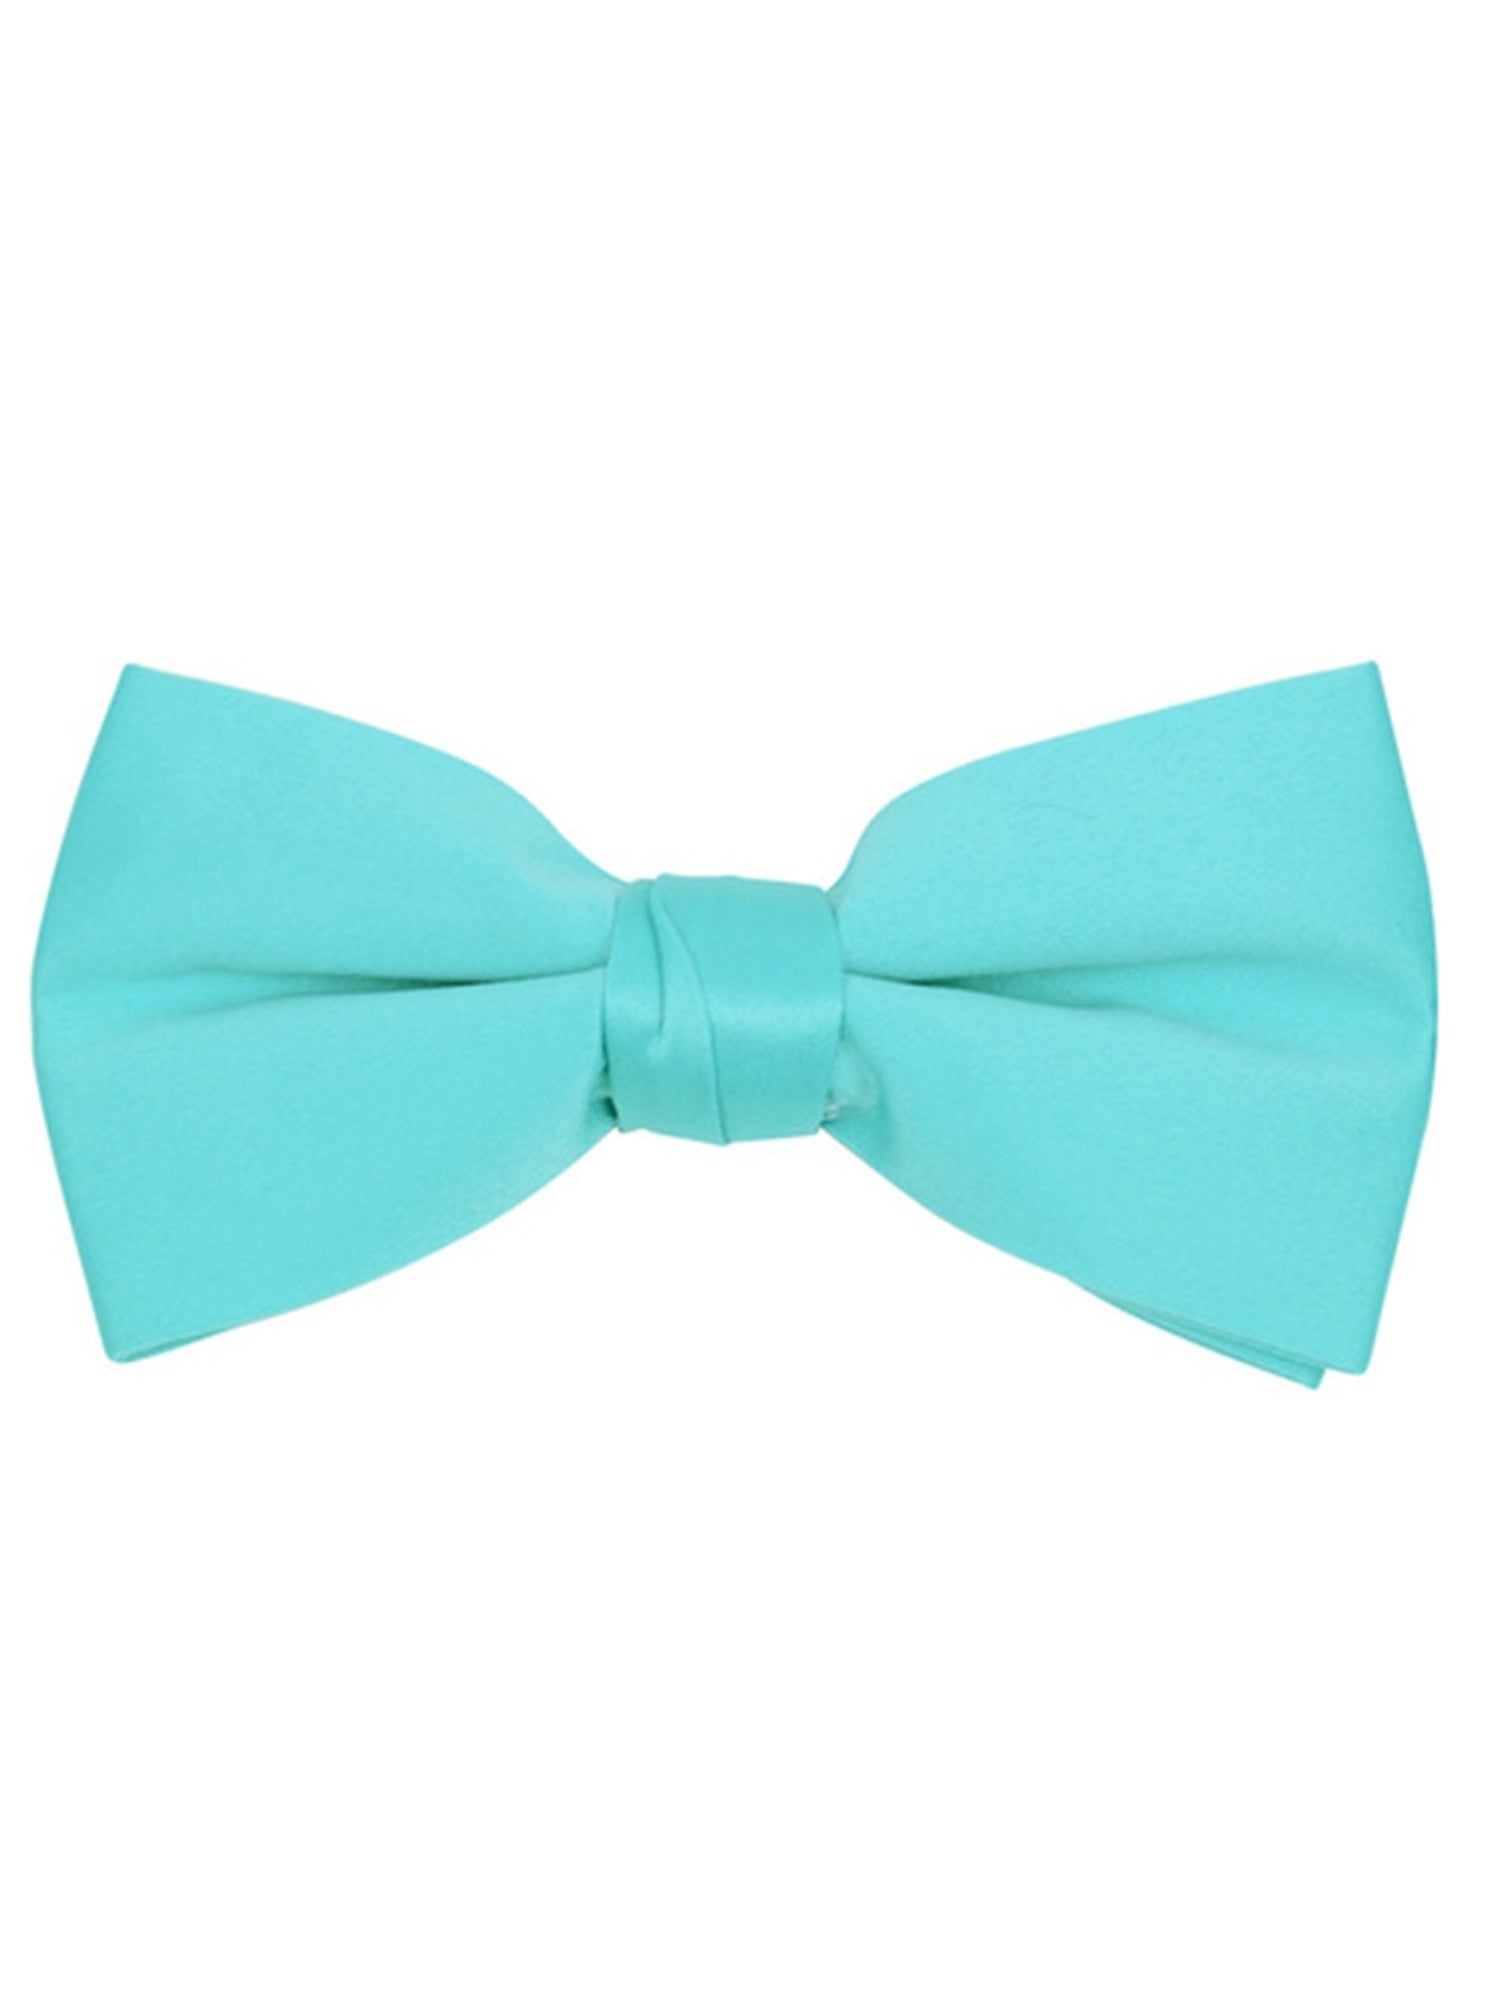 Young Boy's Pre-tied Adjustable Length Bow Tie - Formal Tuxedo Solid Color Boy's Solid Color Bow Tie TheDapperTie Turquoise One Size 